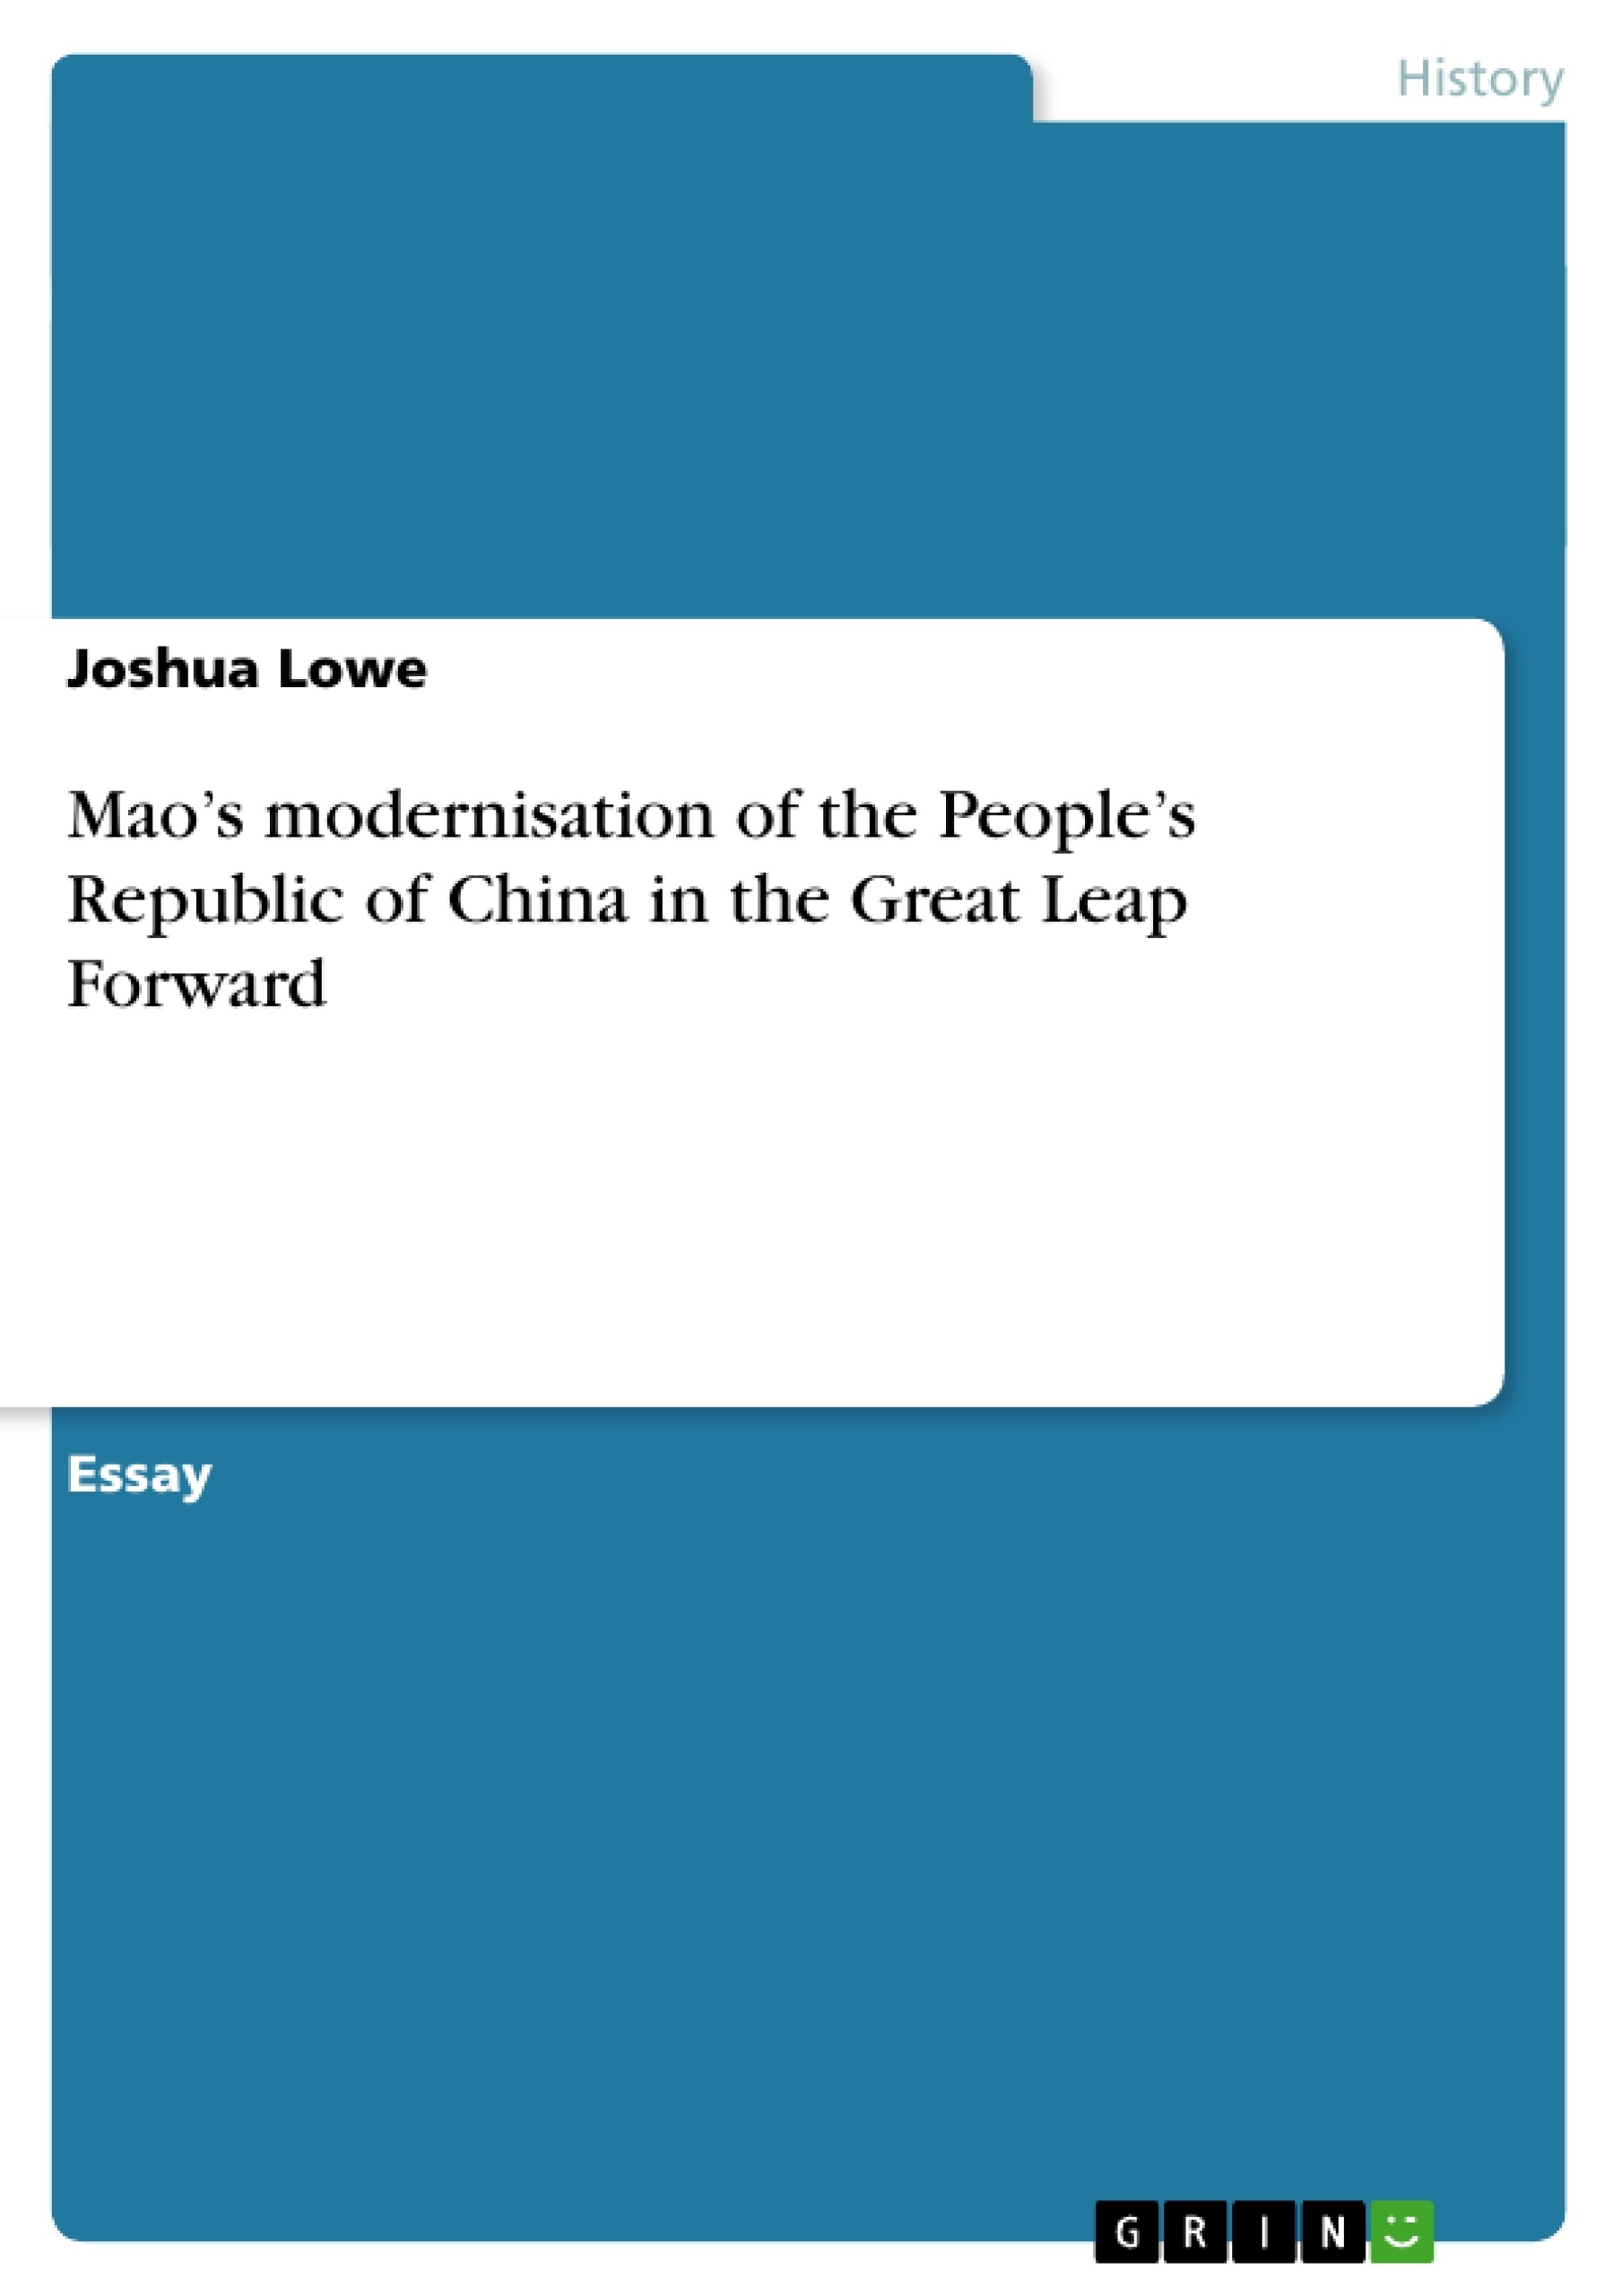 Title: Mao’s modernisation of the People’s Republic of China in the Great Leap Forward